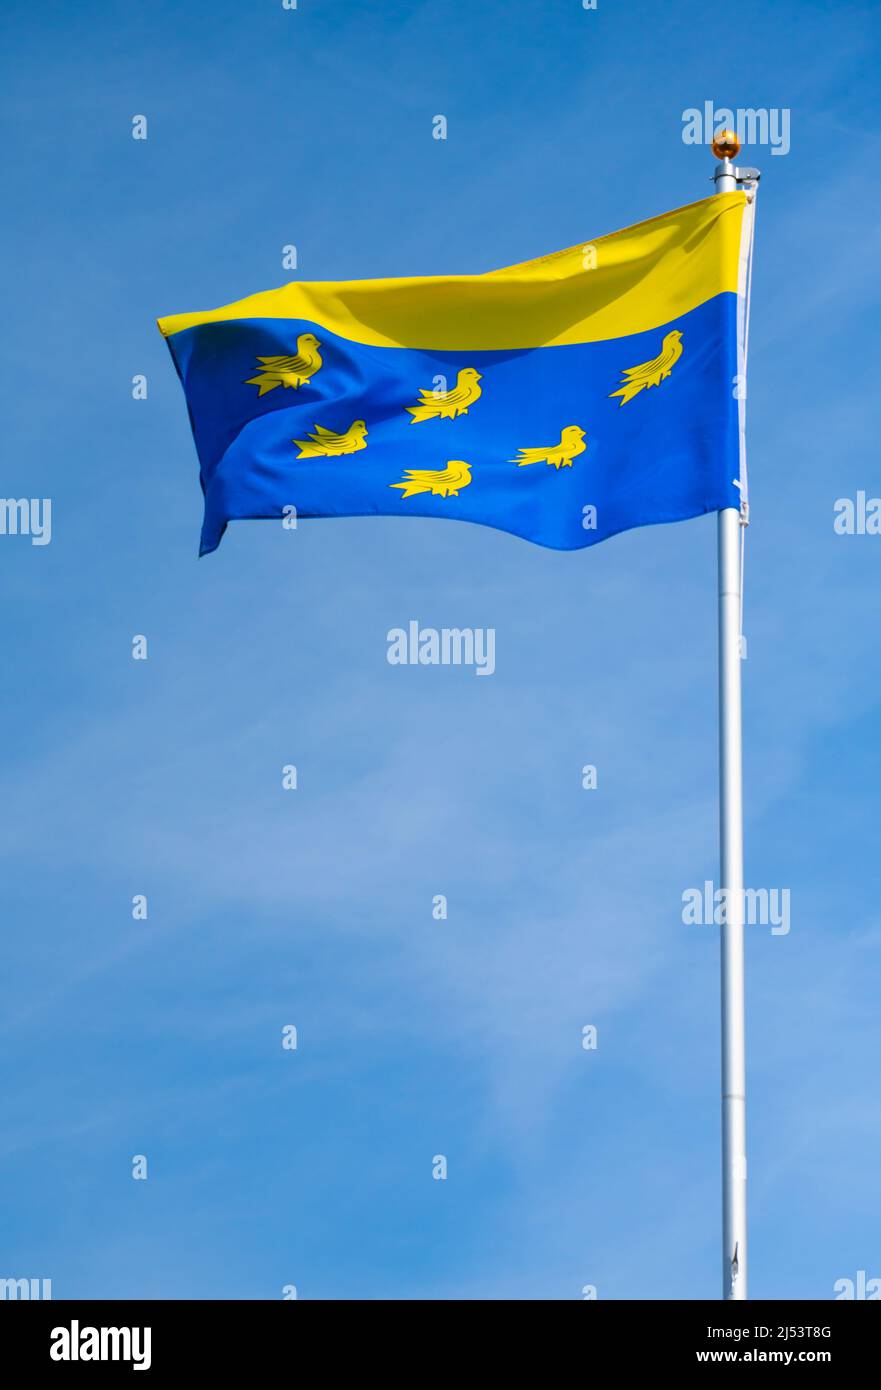 Former flag of West Sussex County Council, also commercially known as the Flag of West Sussex flying in the county of West Sussex, England, UK. Stock Photo